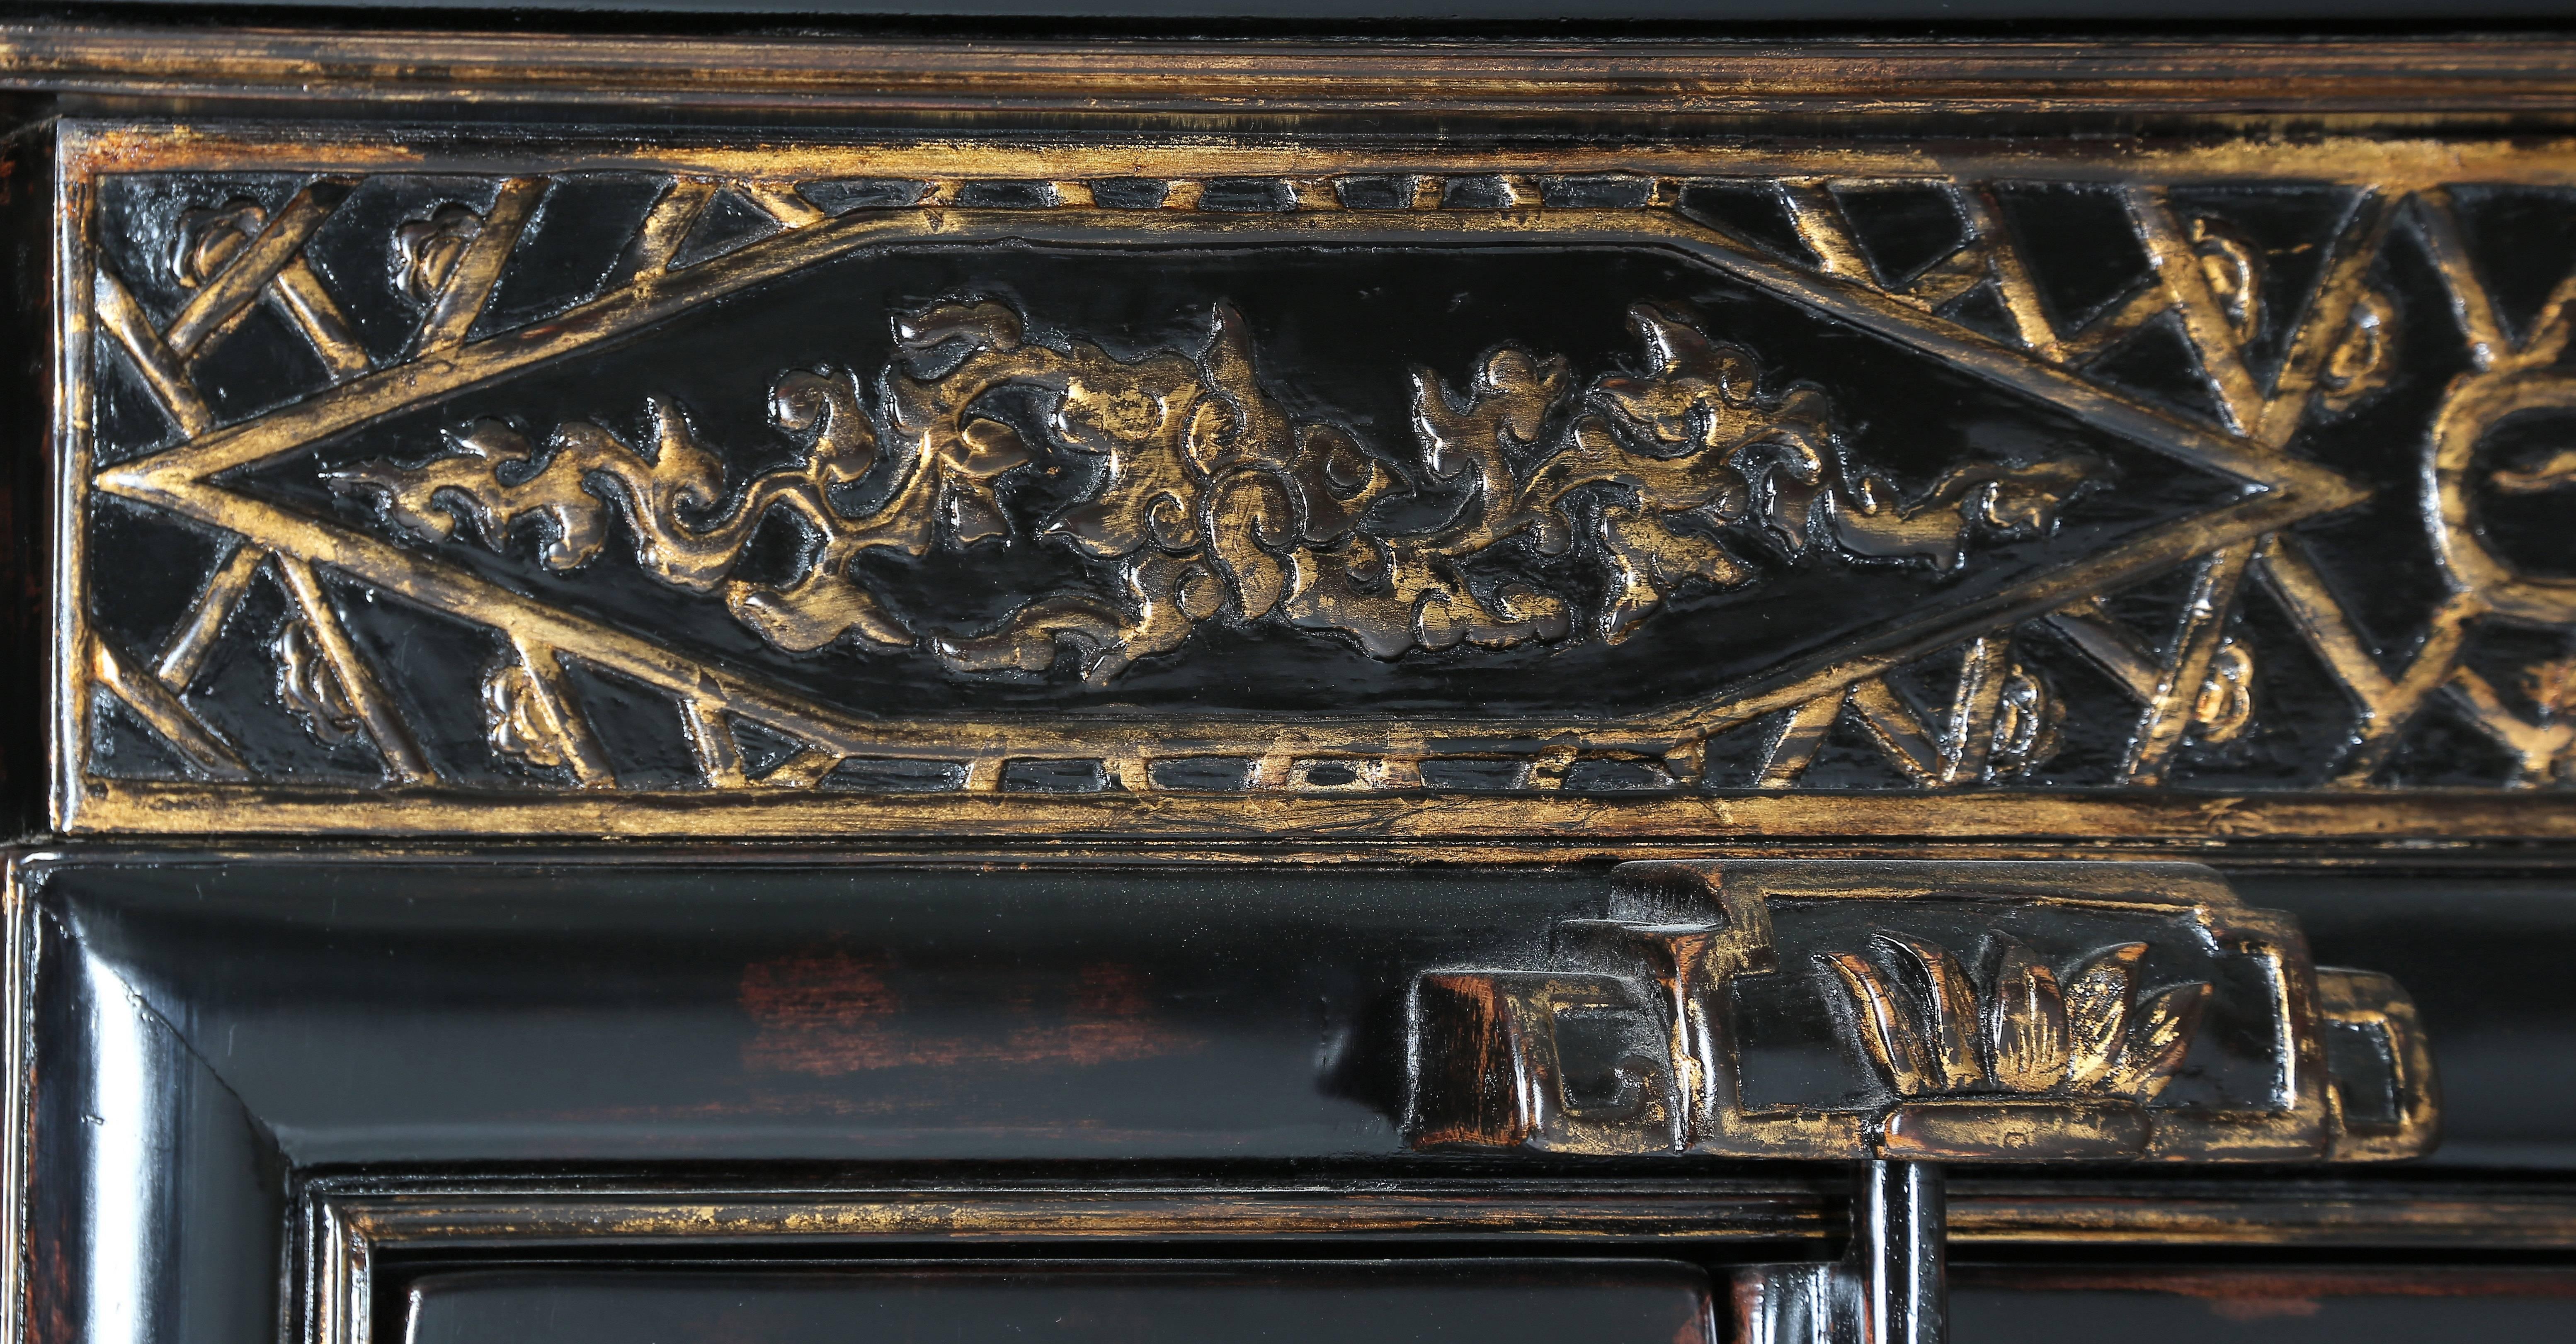 This charming cabinet featuring a molded ice-plate top edge above a high waist, decorated with gilded floral relief-carving within gilded geometric borders, surrounded by cracked-ice motif on the front and embossed geometric panels on the sides, a